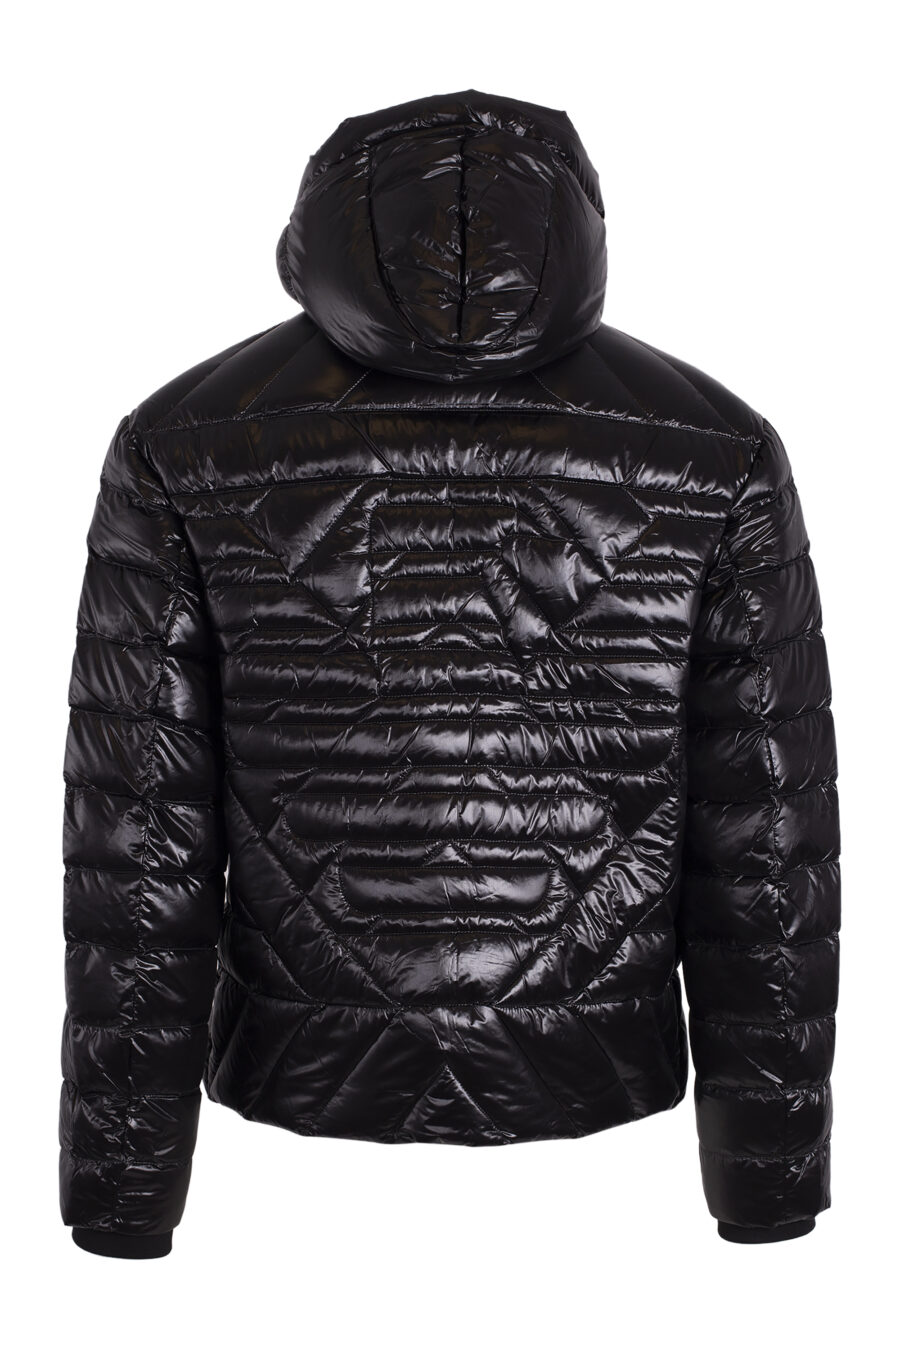 Black hooded quilted jacket with eagle logo - IMG 4682